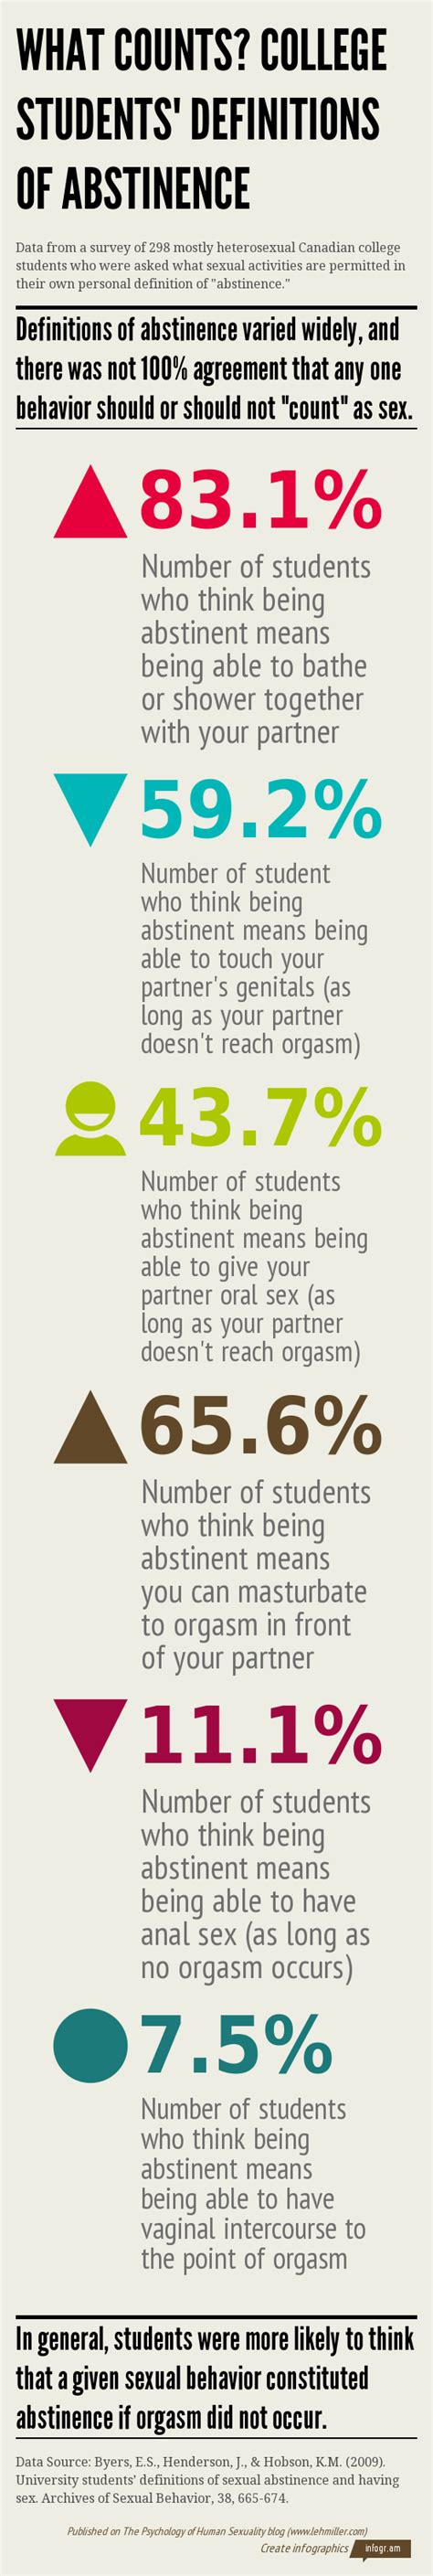 What Counts College Students Definitions Of Abstinence Infographic